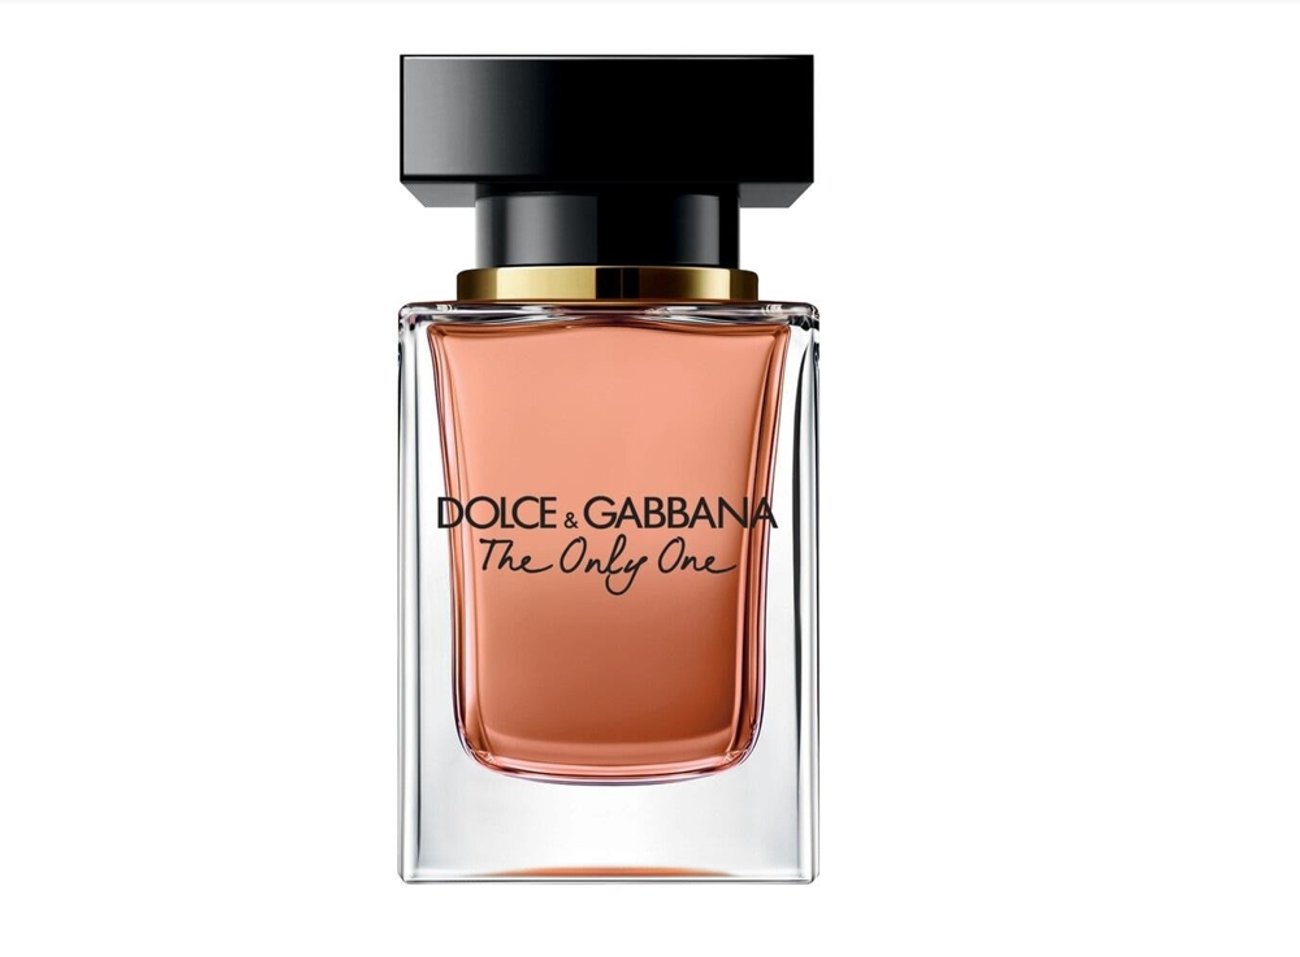 Dolce&Gabbana - The Only One 30 ml